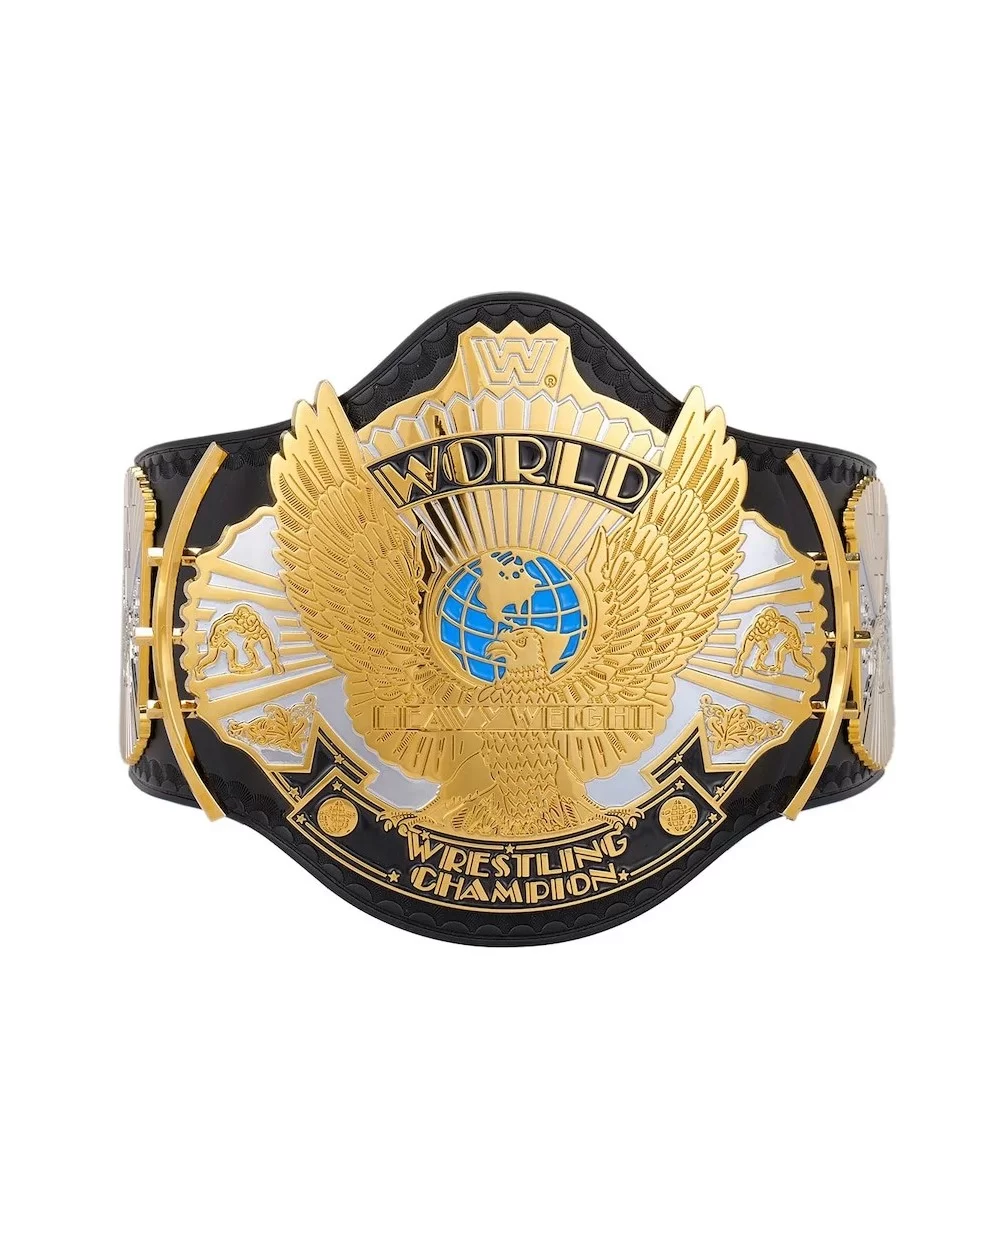 WWE Winged Eagle Dual Plated Championship Replica Title Belt $165.60 Title Belts